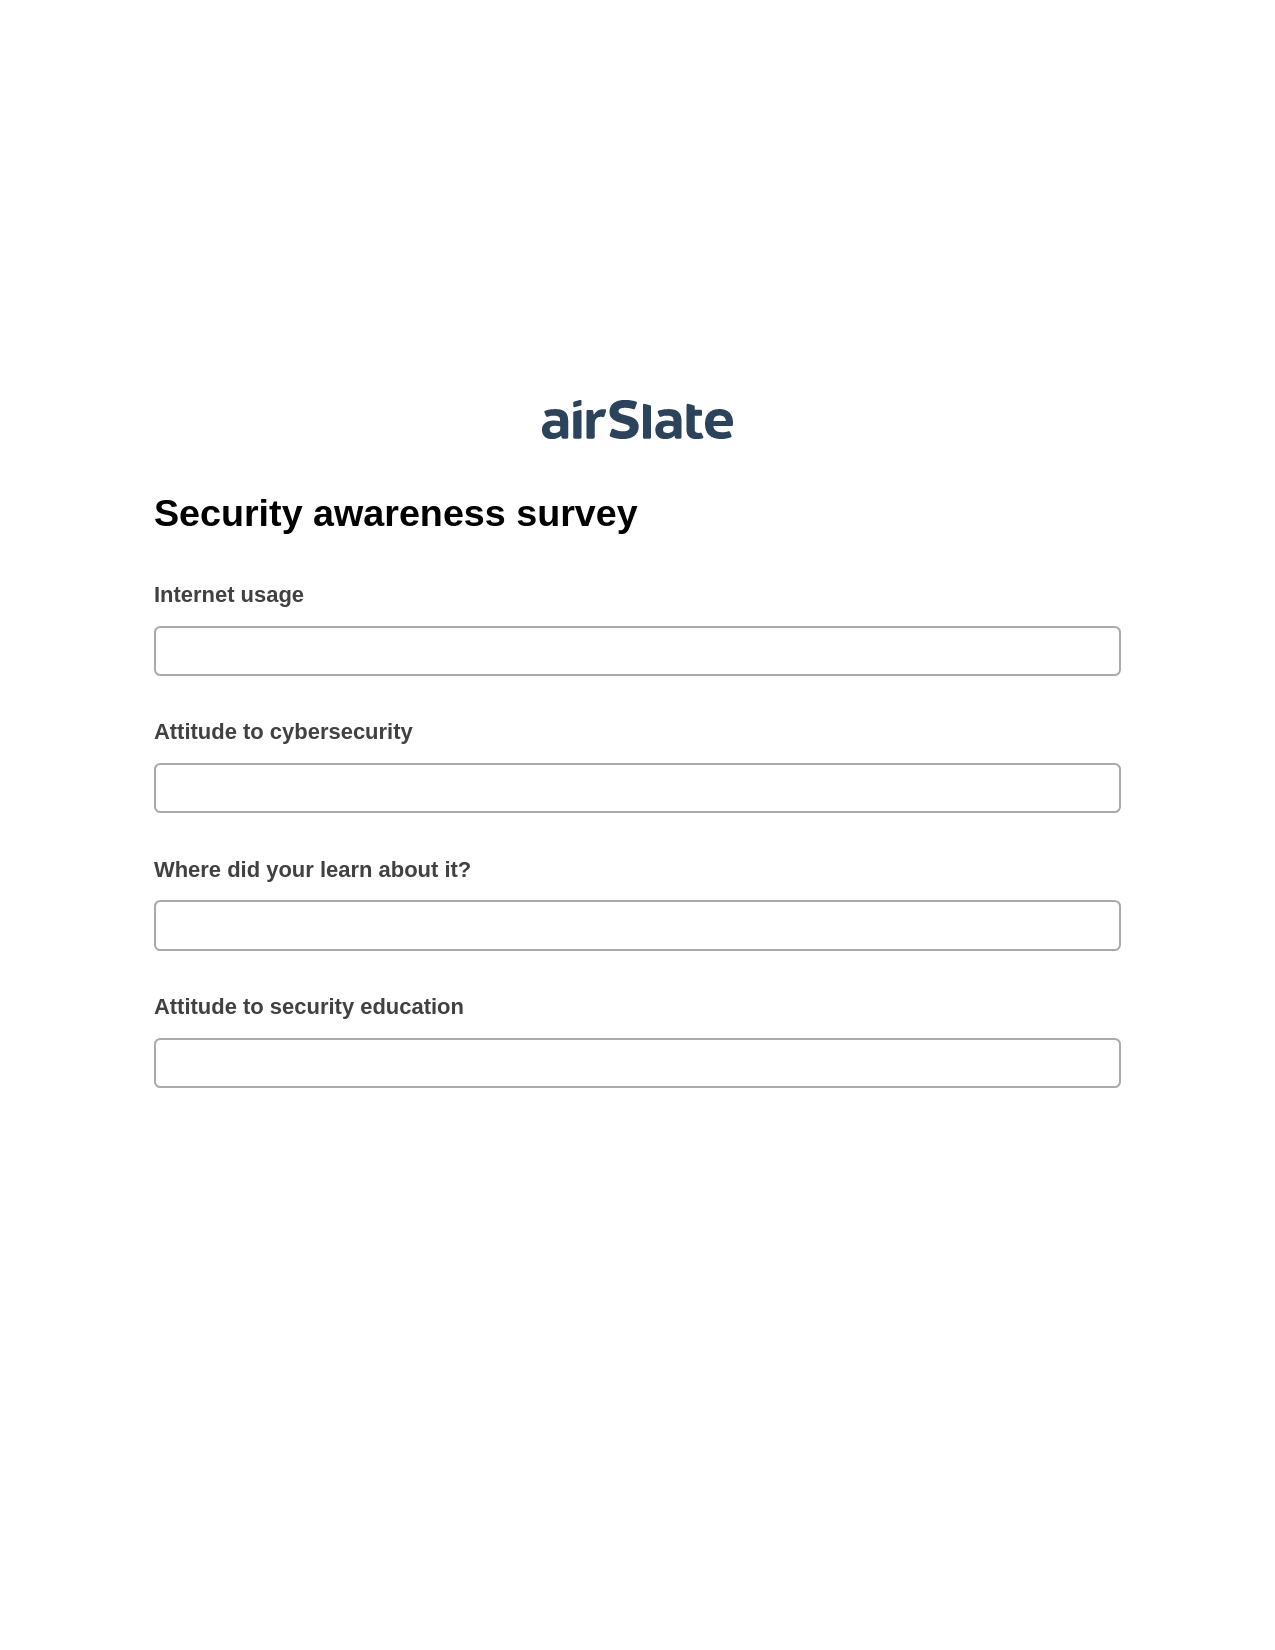 Security awareness survey Pre-fill from another Slate Bot, Lock the slate bot, Slack Two-Way Binding Bot